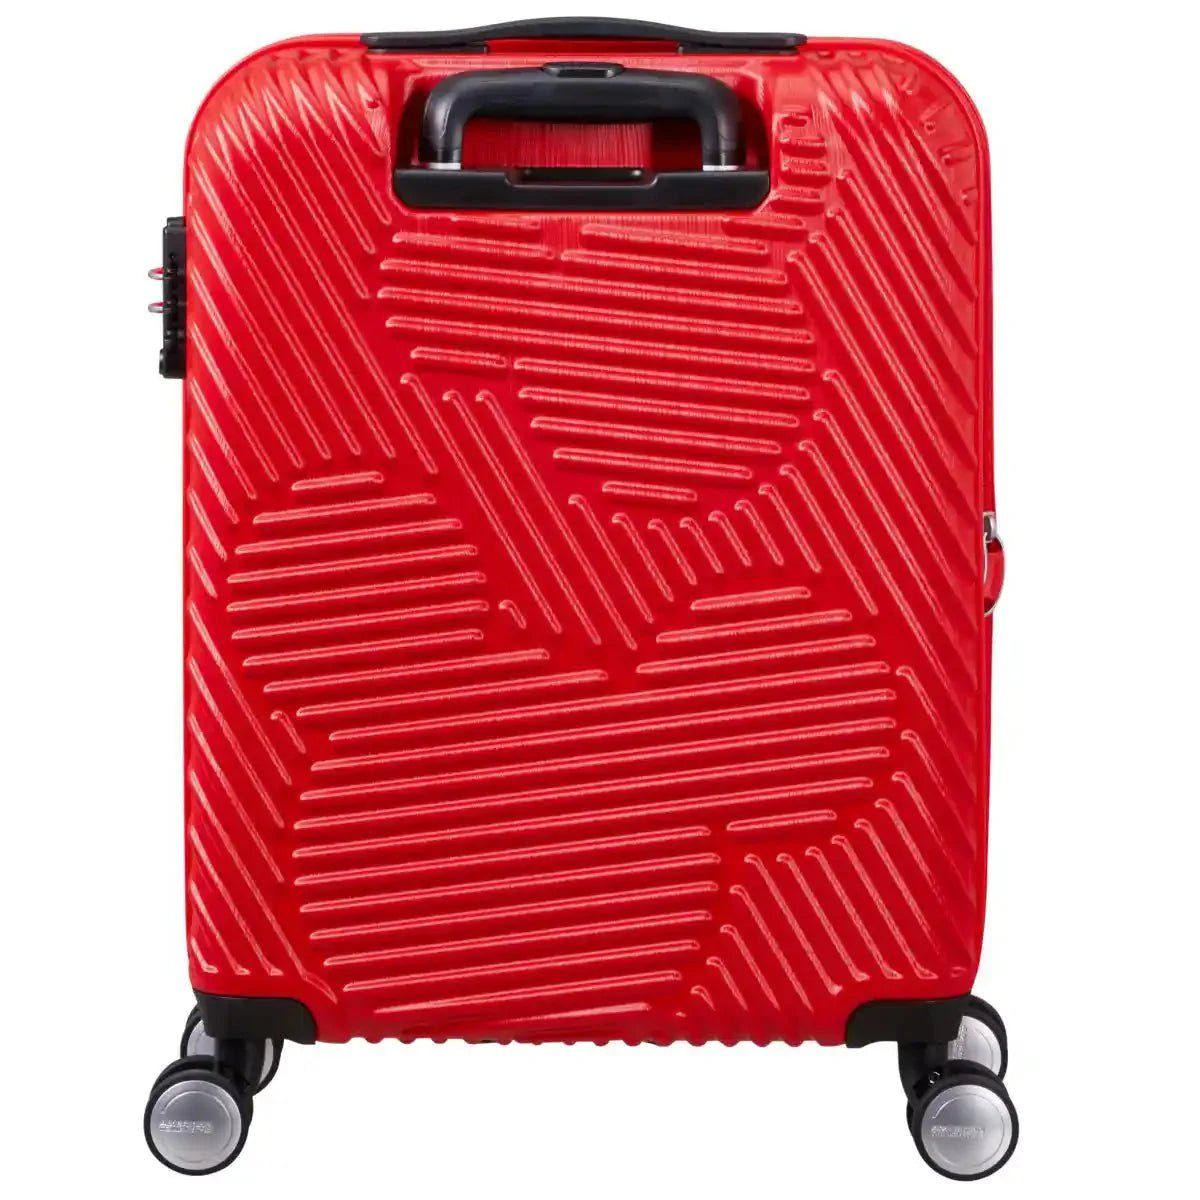 American Tourister Mickey Clouds Spinner 4-Rollen Trolley 55 cm - Mickey Electric Lemon